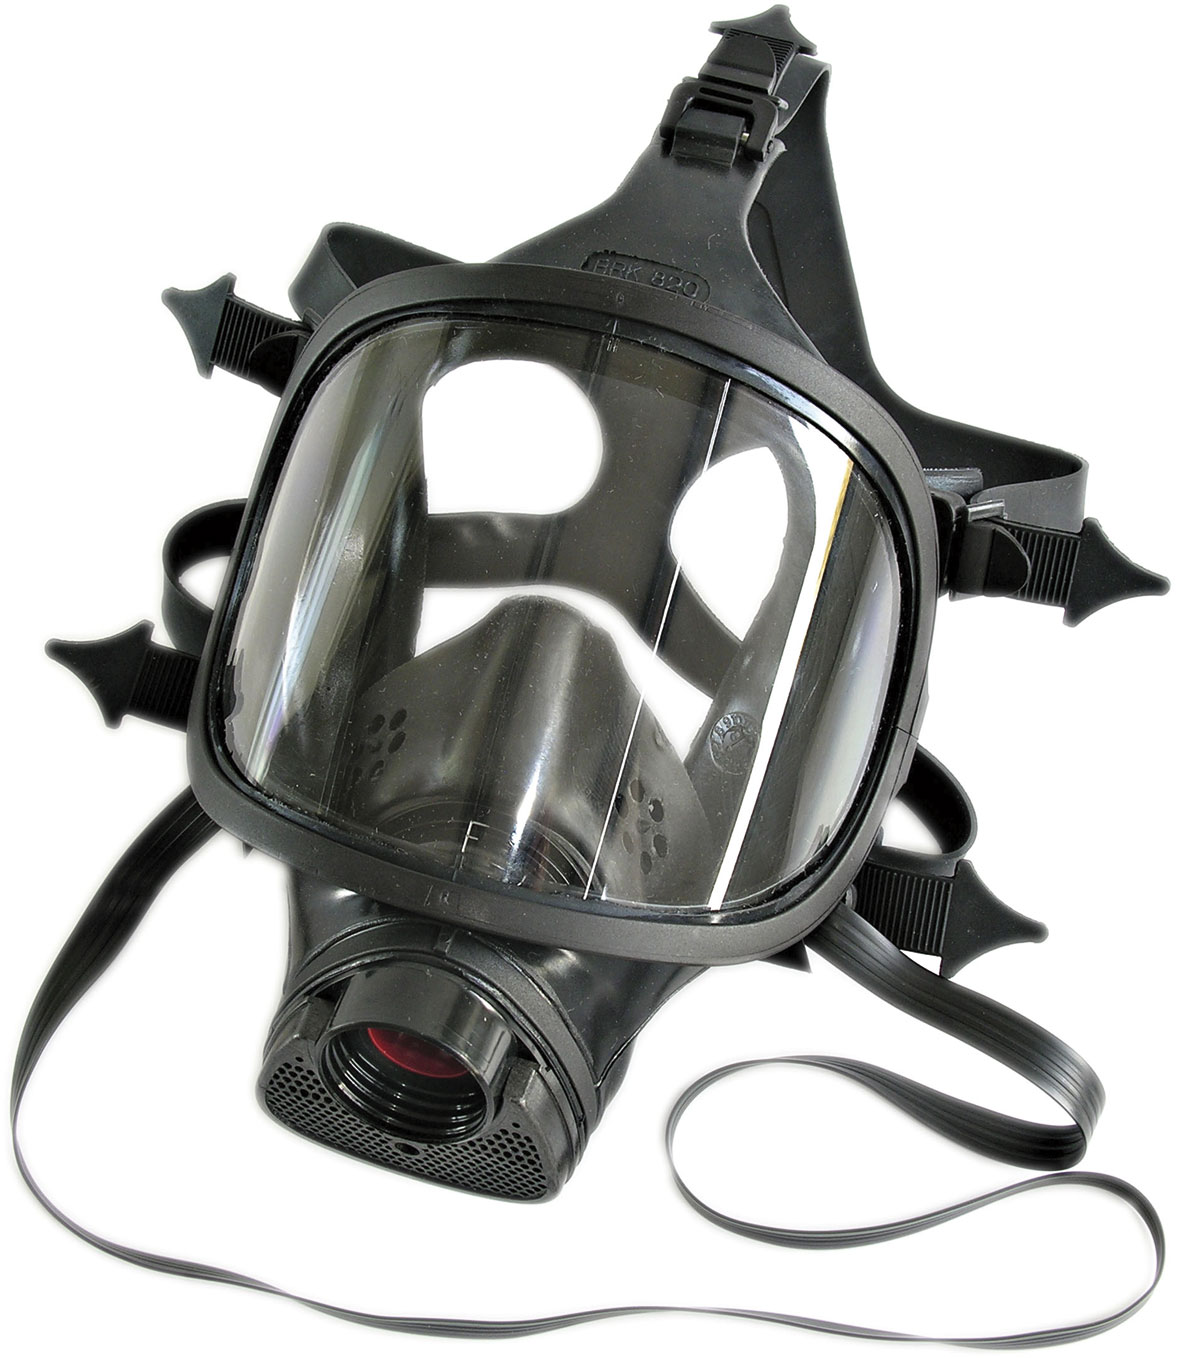 Full face mask BRK 820 with heat resistant visor. BARIKOS. Without filters. Black rubber mixture, approved according to EN 136 class 3 and CE-marked, with diaphragm, heat-resistant polycarbonate visor and standard thread connector according to EN 148-1